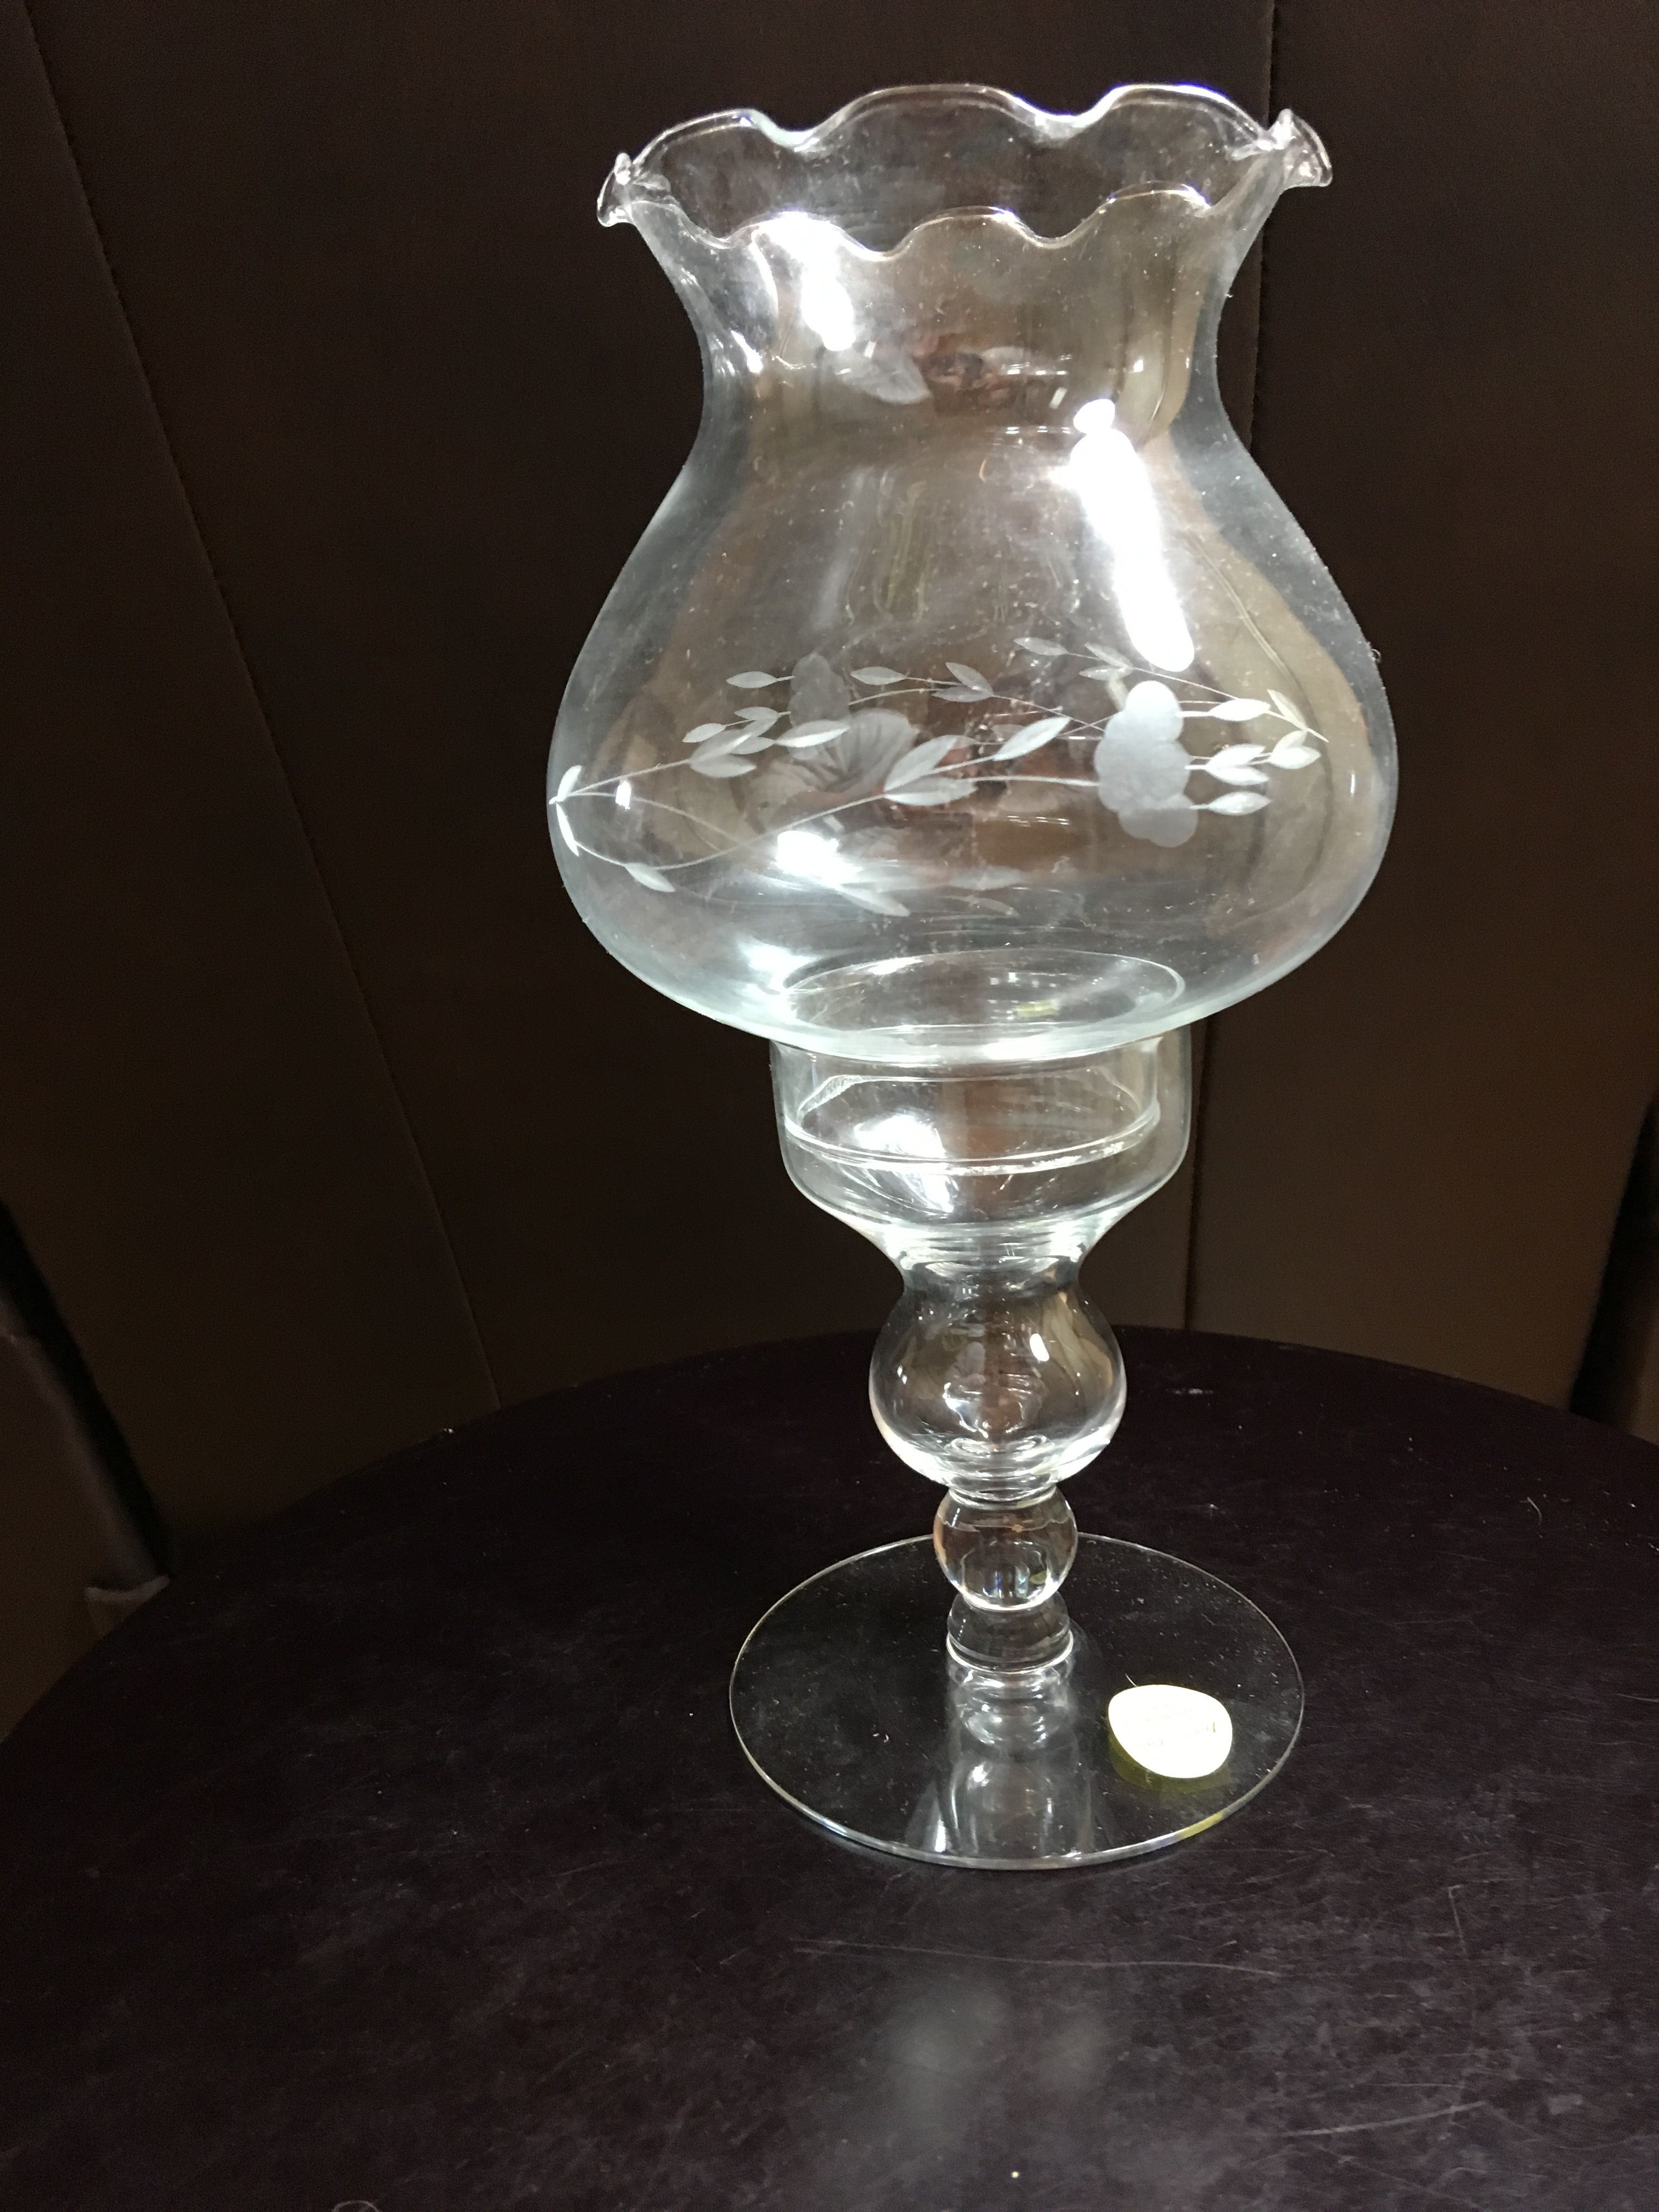 17 Elegant 24 Inch Tall Clear Vases 2024 free download 24 inch tall clear vases of princess house glass candle lamp in box candle lamp princess in princess house glass candle lamp holder still in box approx measures 9 25 inch overall height